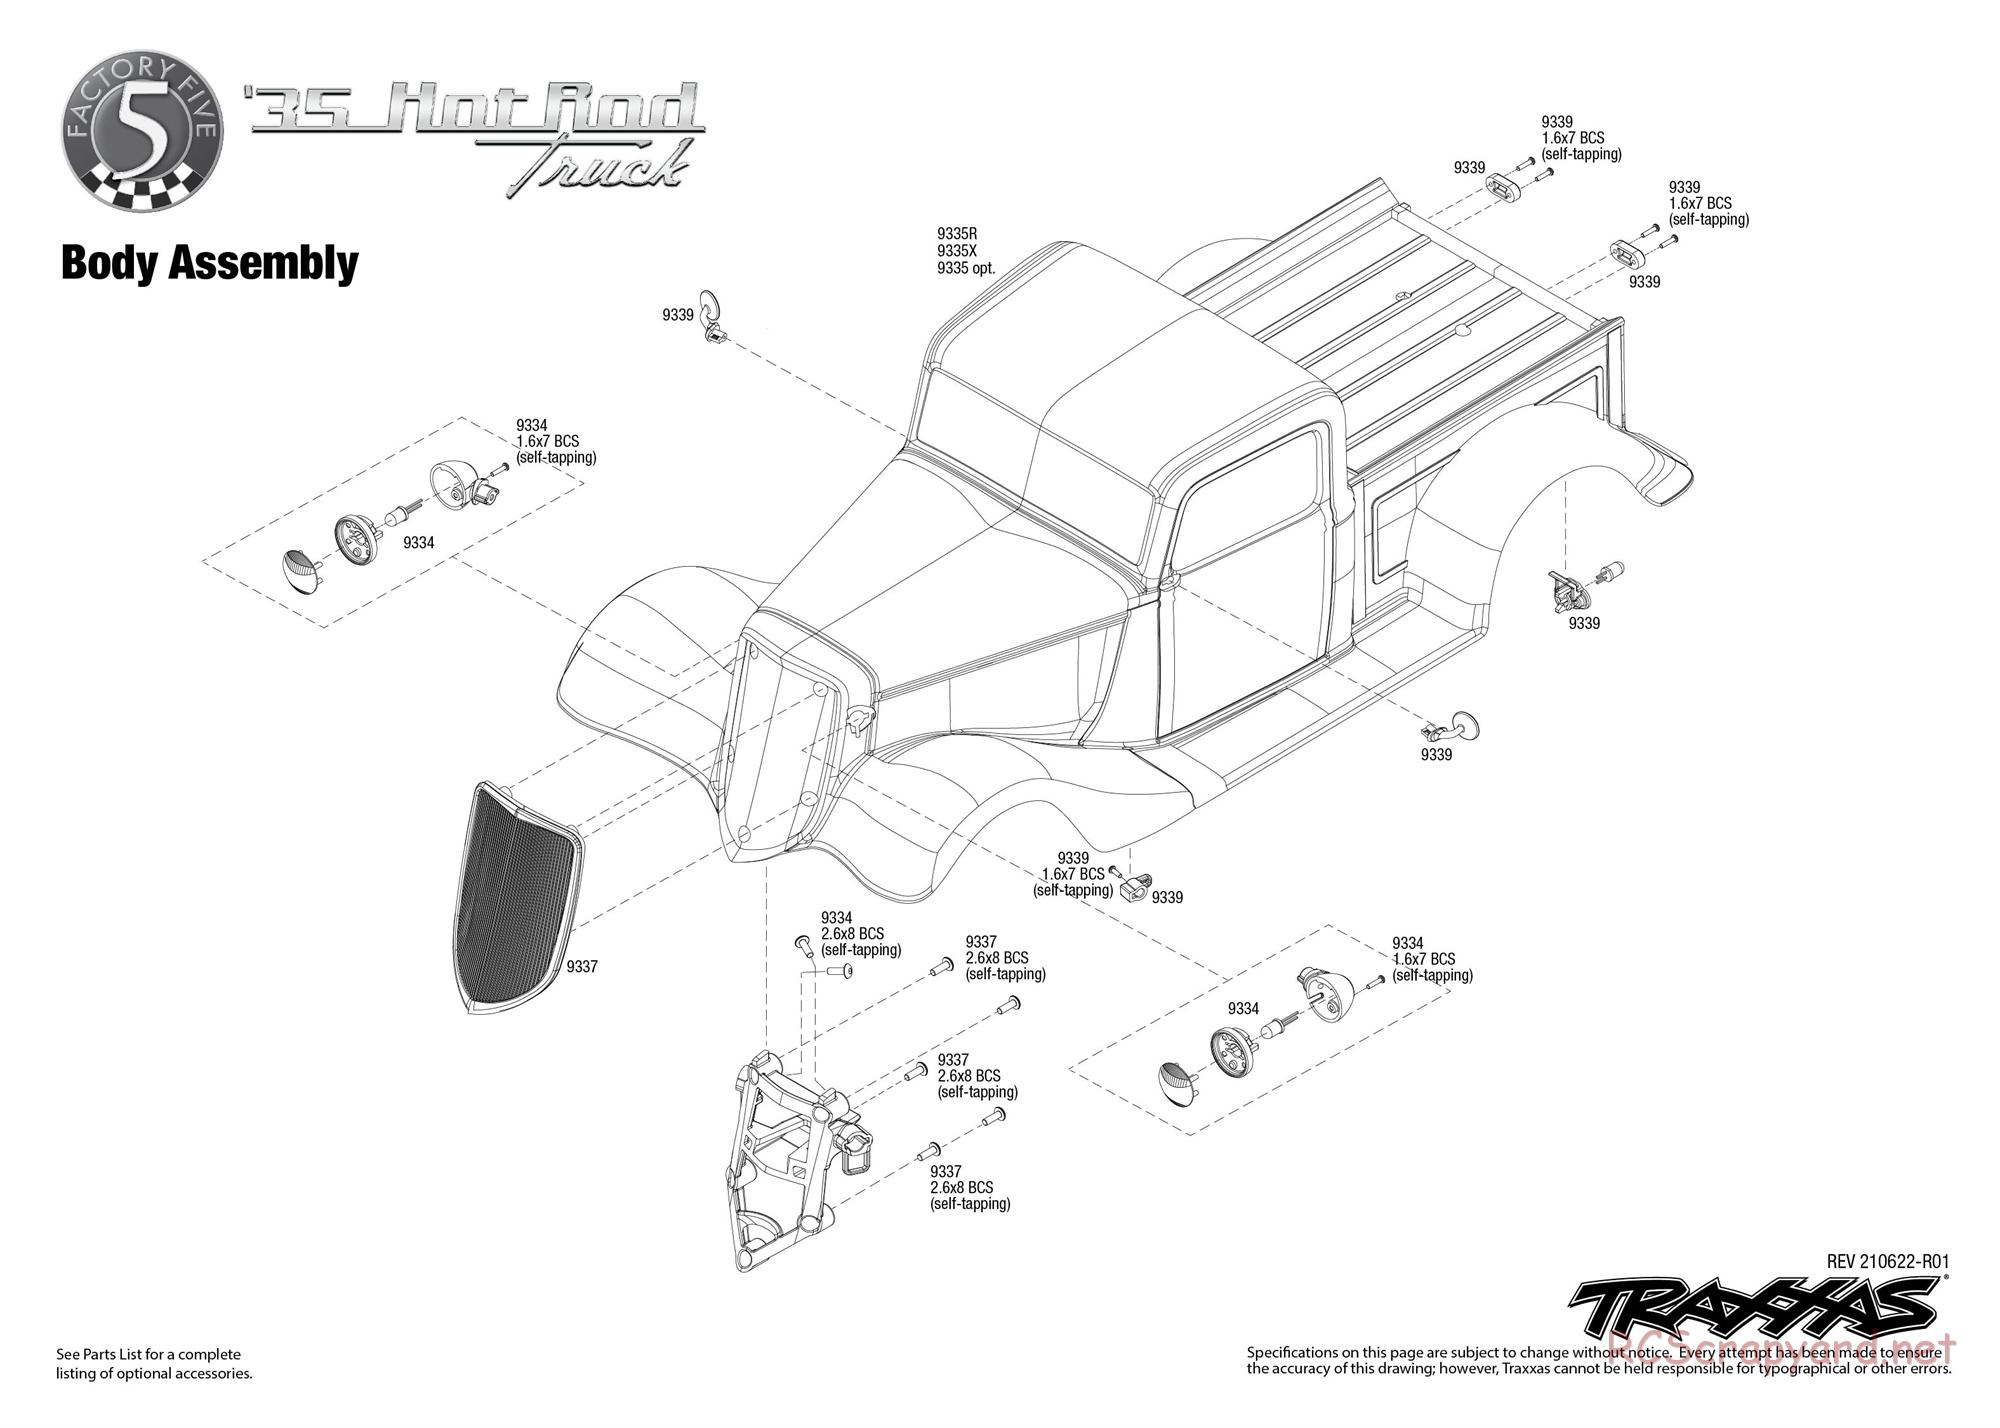 Traxxas - Hot Rod 1935 Truck (2021) - Exploded Views - Page 1